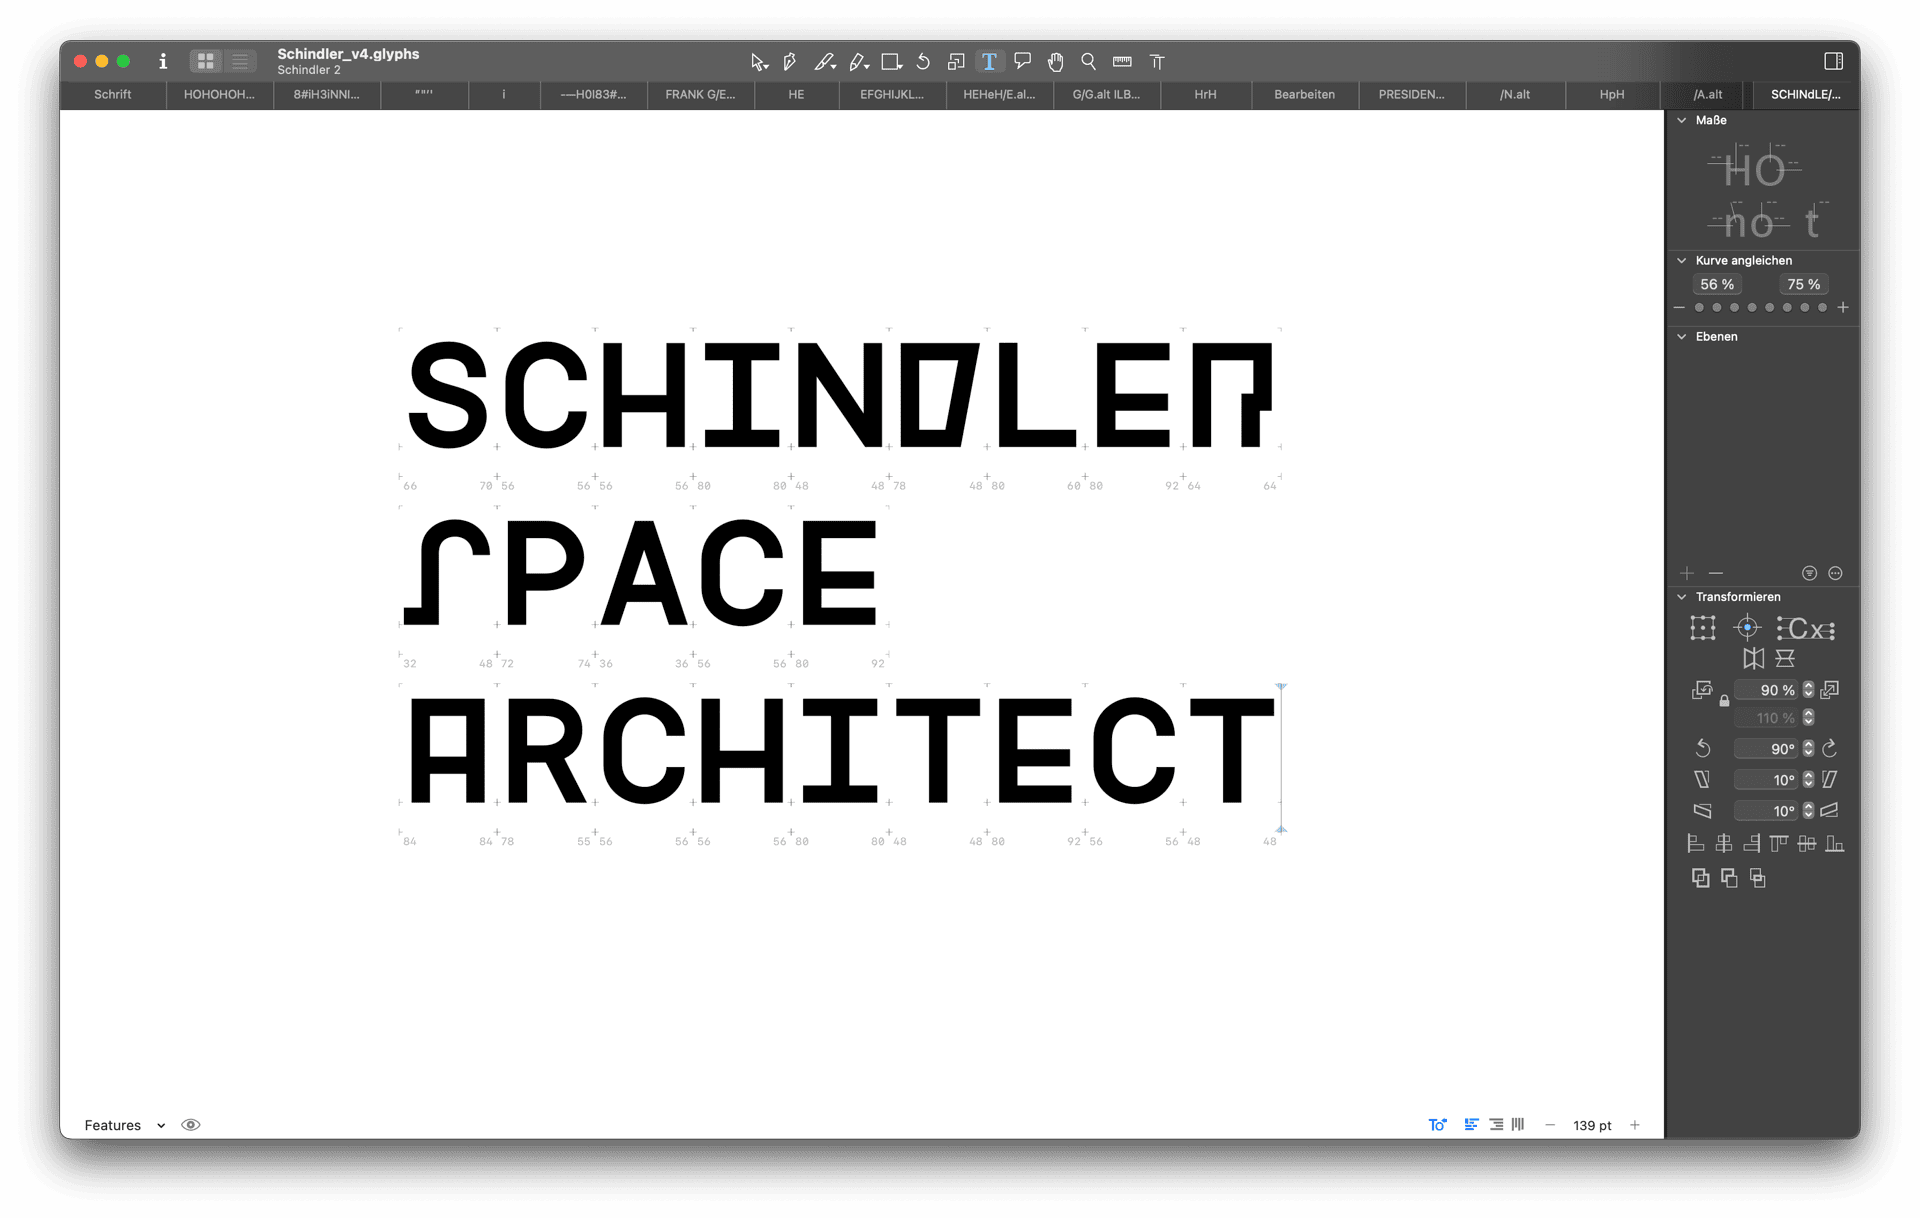 A screenshot of the font design software Glyphs. It shows the film title »Schindler Space Architect« written in all caps in a font that is inspired by architect R.M. Schindler’s letters which are themselves informed by letters designed in the 20s and 30s.